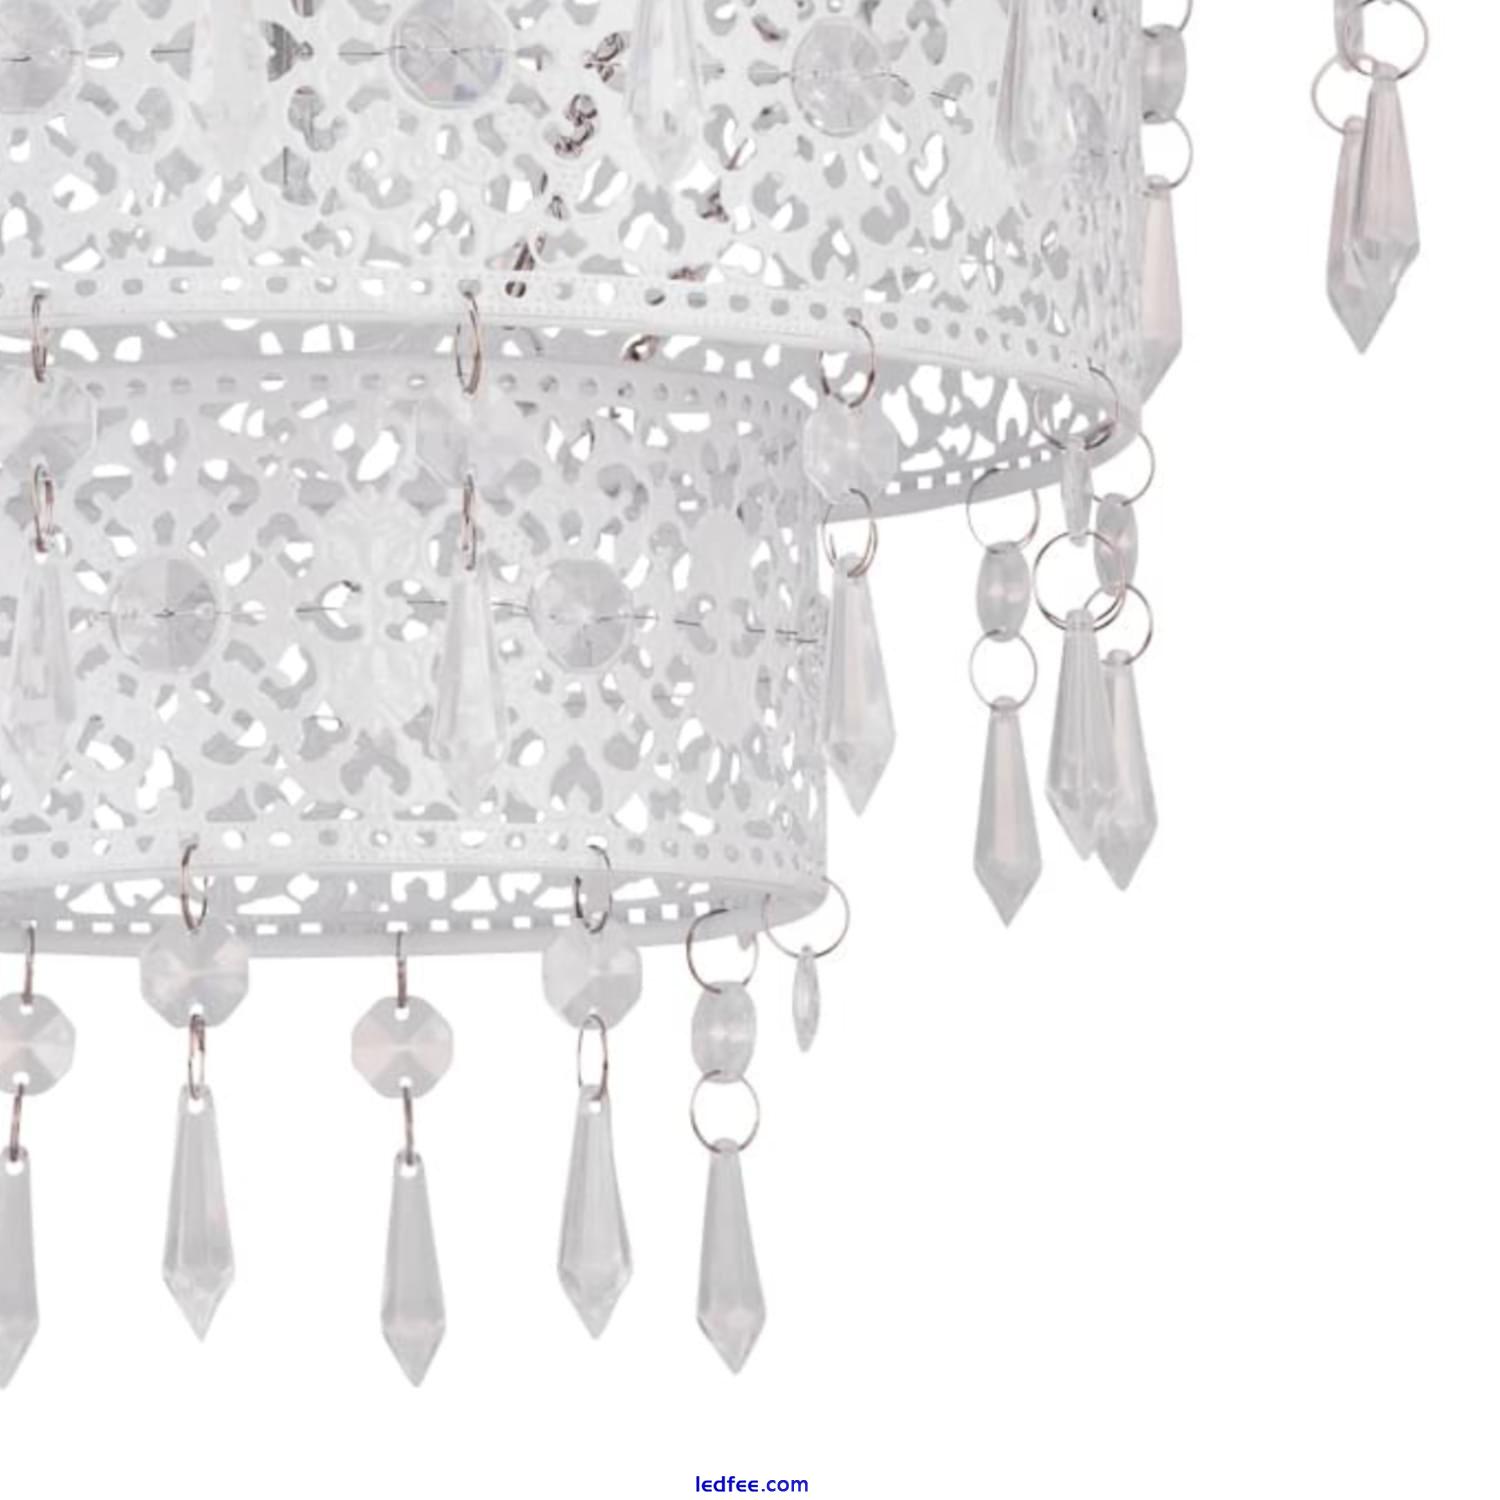 Modern White 3 Tier Metal Cut Out Ceiling Light Shade Pendant Morrocan Design 3 